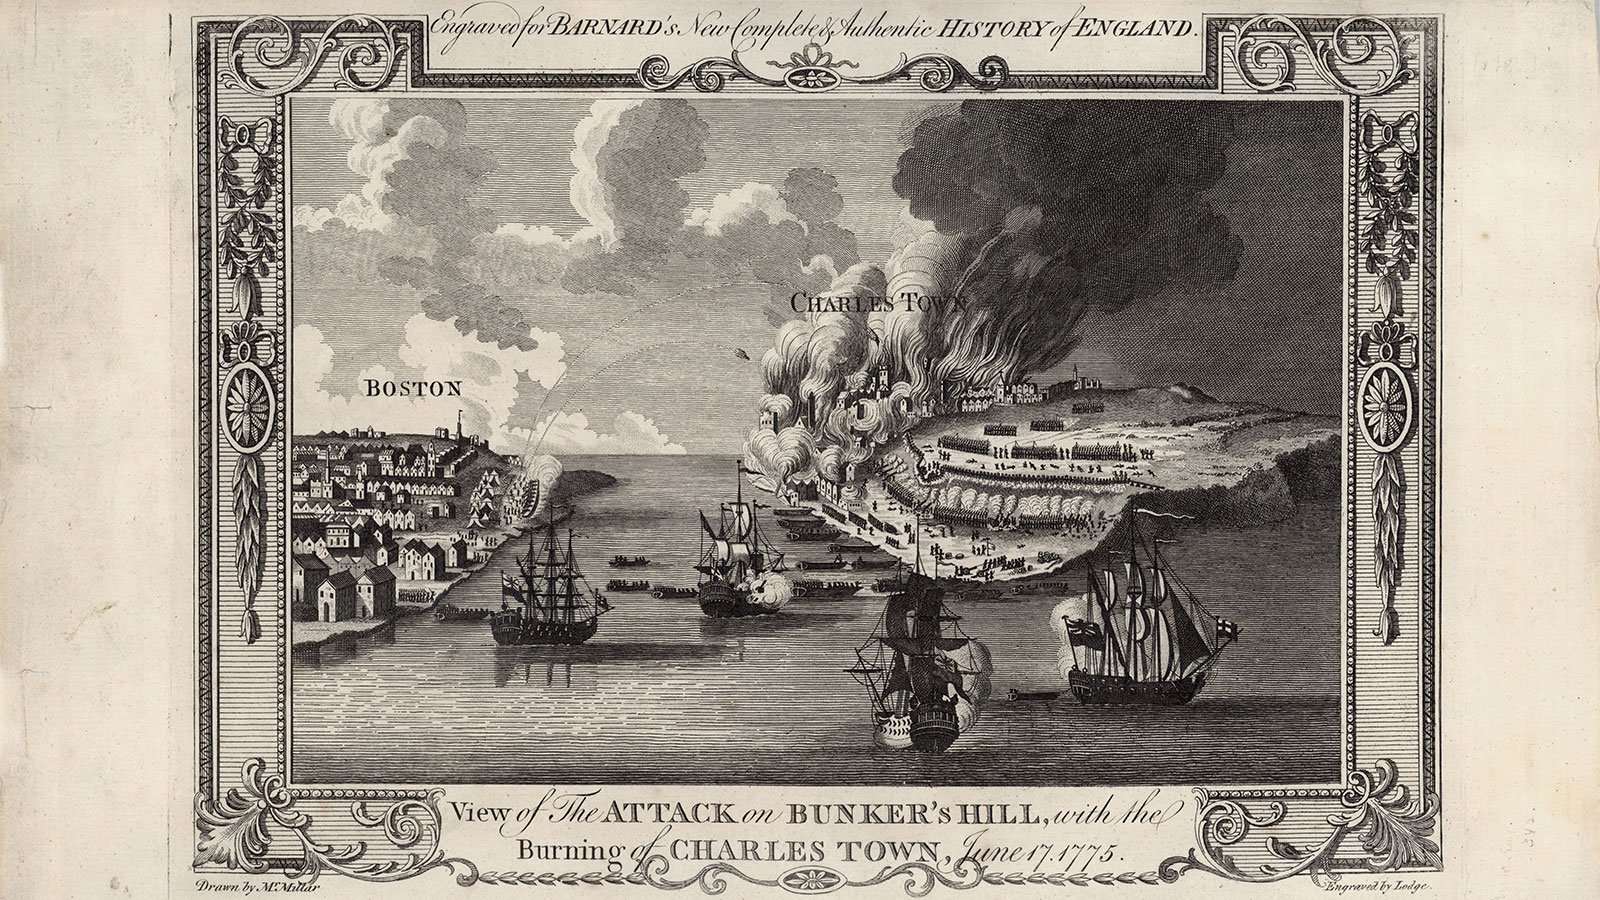 View of the Attack on Bunker's Hill, with the Burning of Charles Town, June 17, 1775